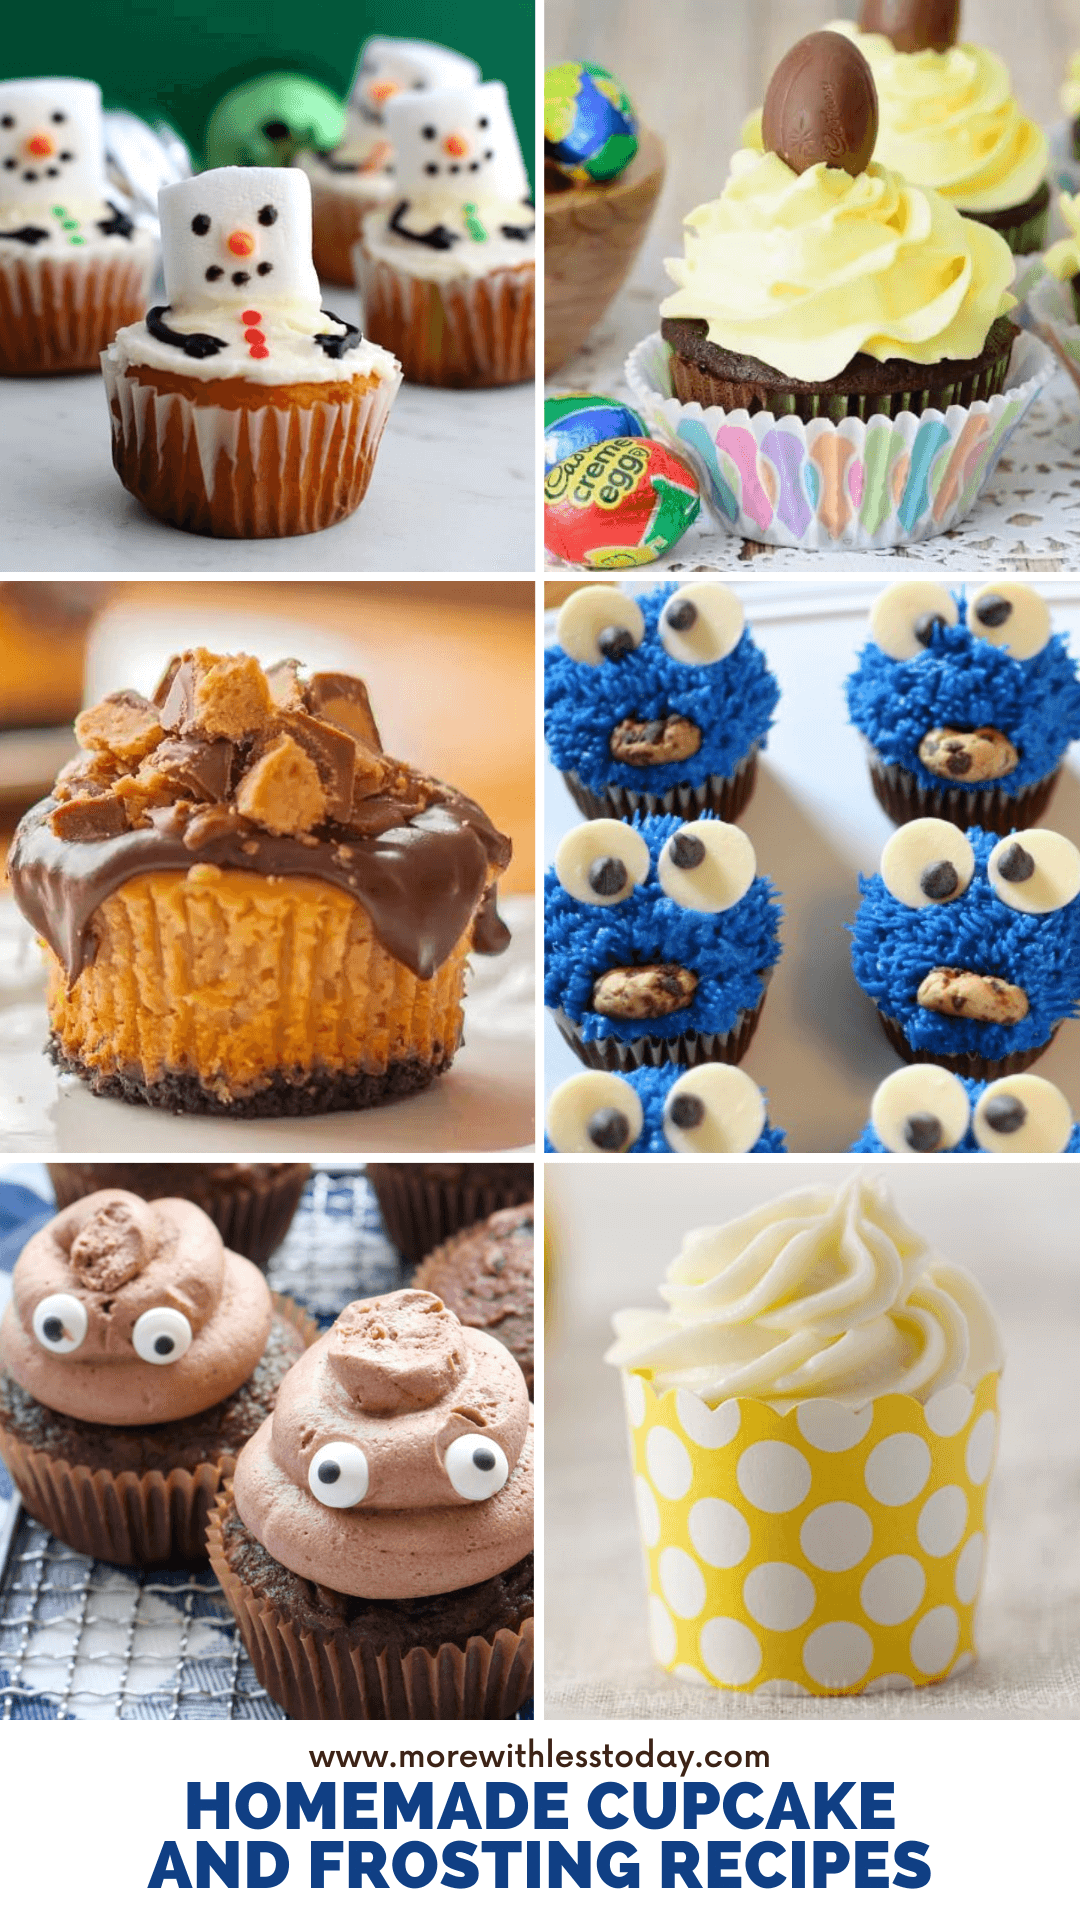 Homemade Cupcake and Frosting Recipes That Everyone Will Love - PIN